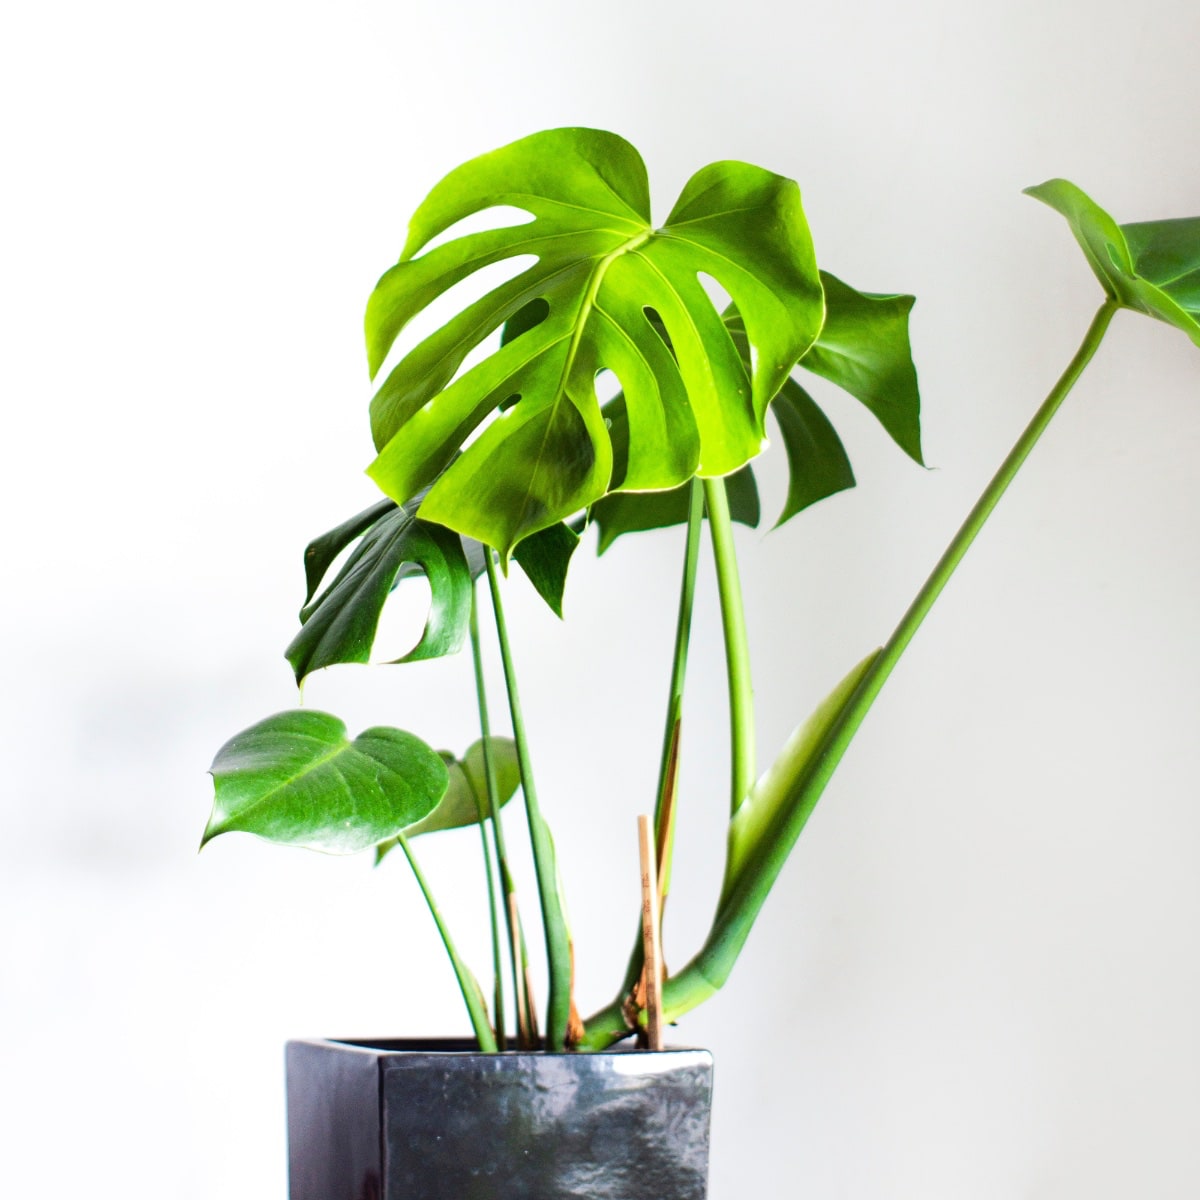 Propagate Monstera Without Nodes: Can Leaves Grow into Plants?